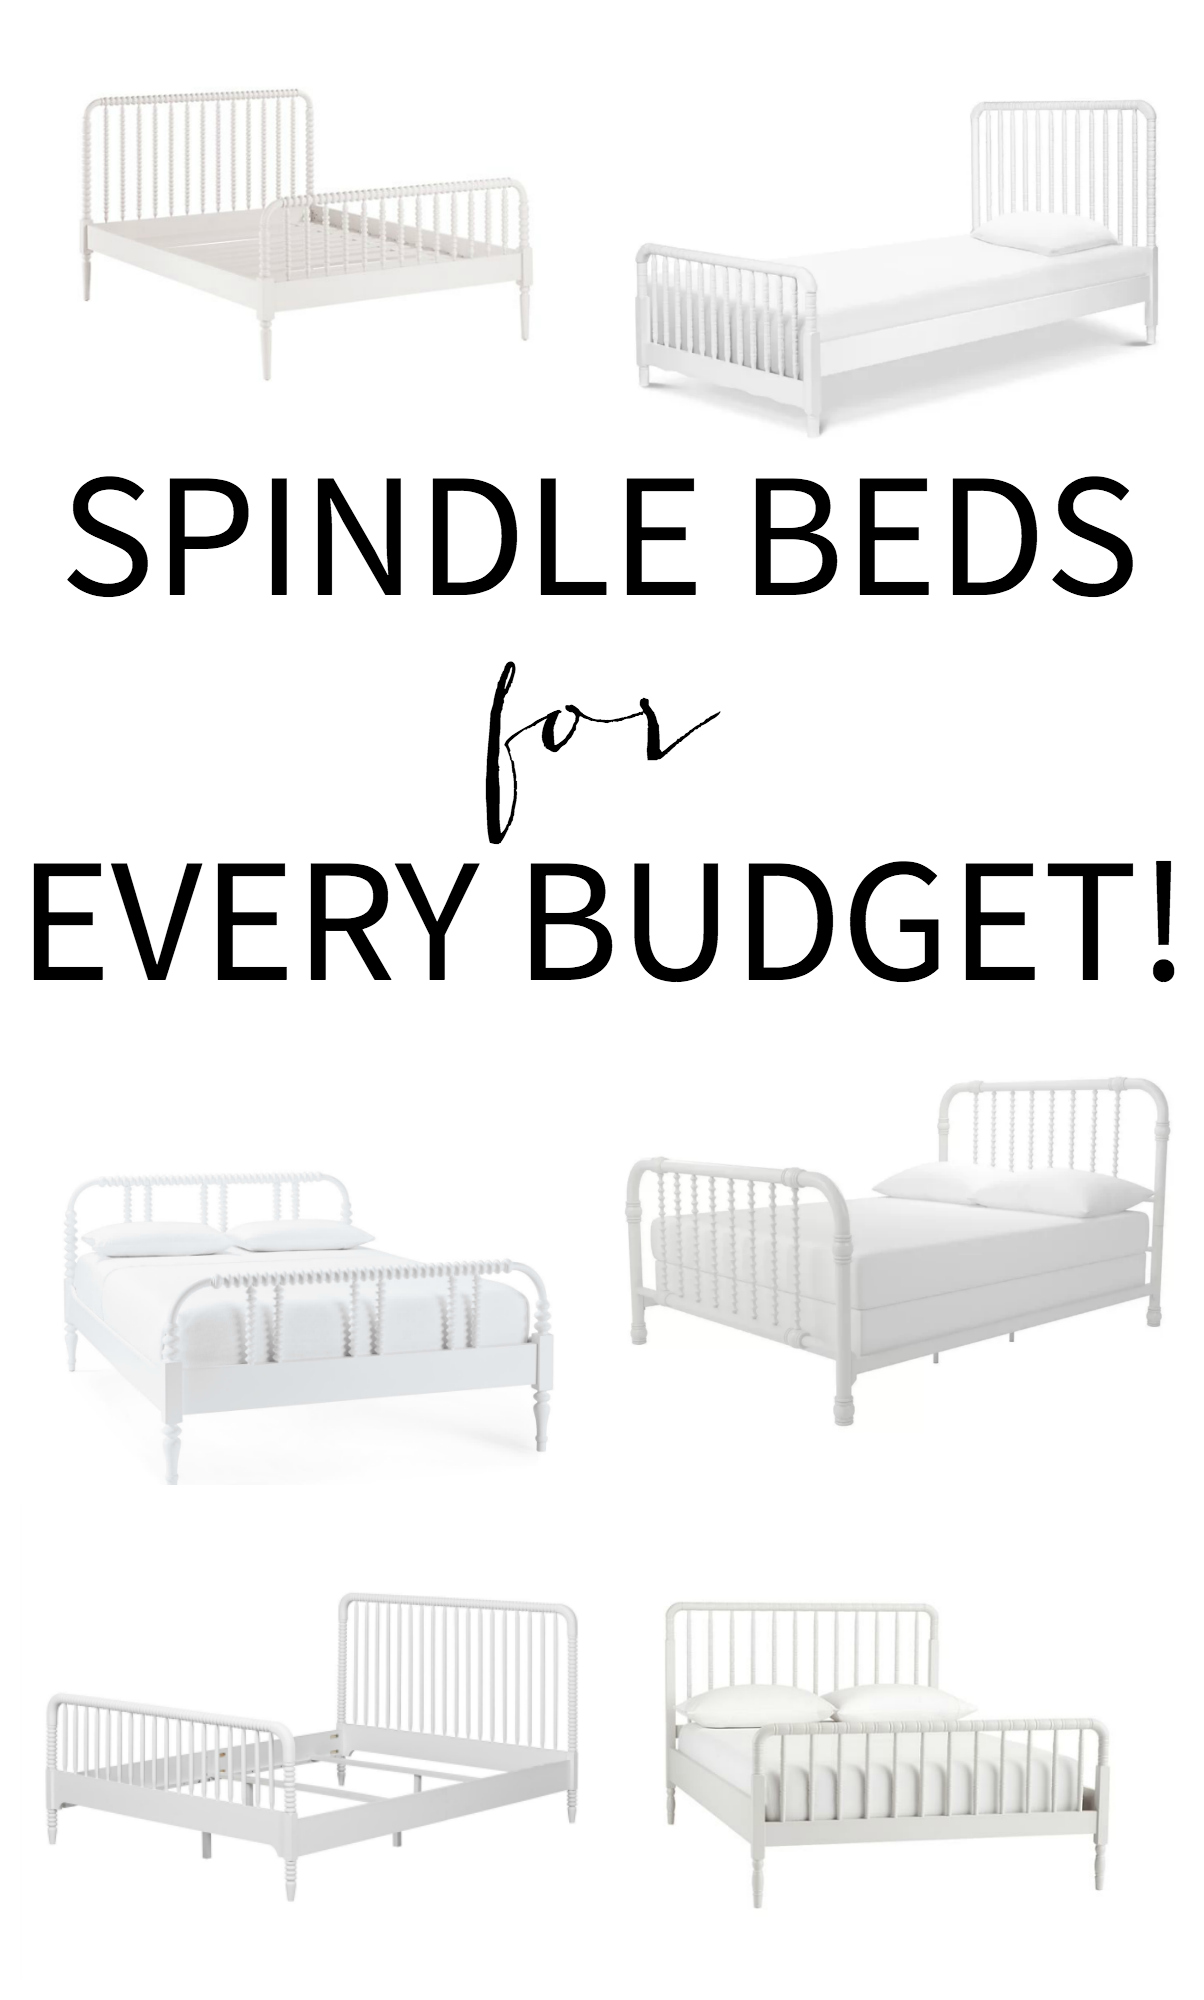 Jenny Lind spindle bed sources for every budget. You can get this classic, high end bed style at a great affordable price point!